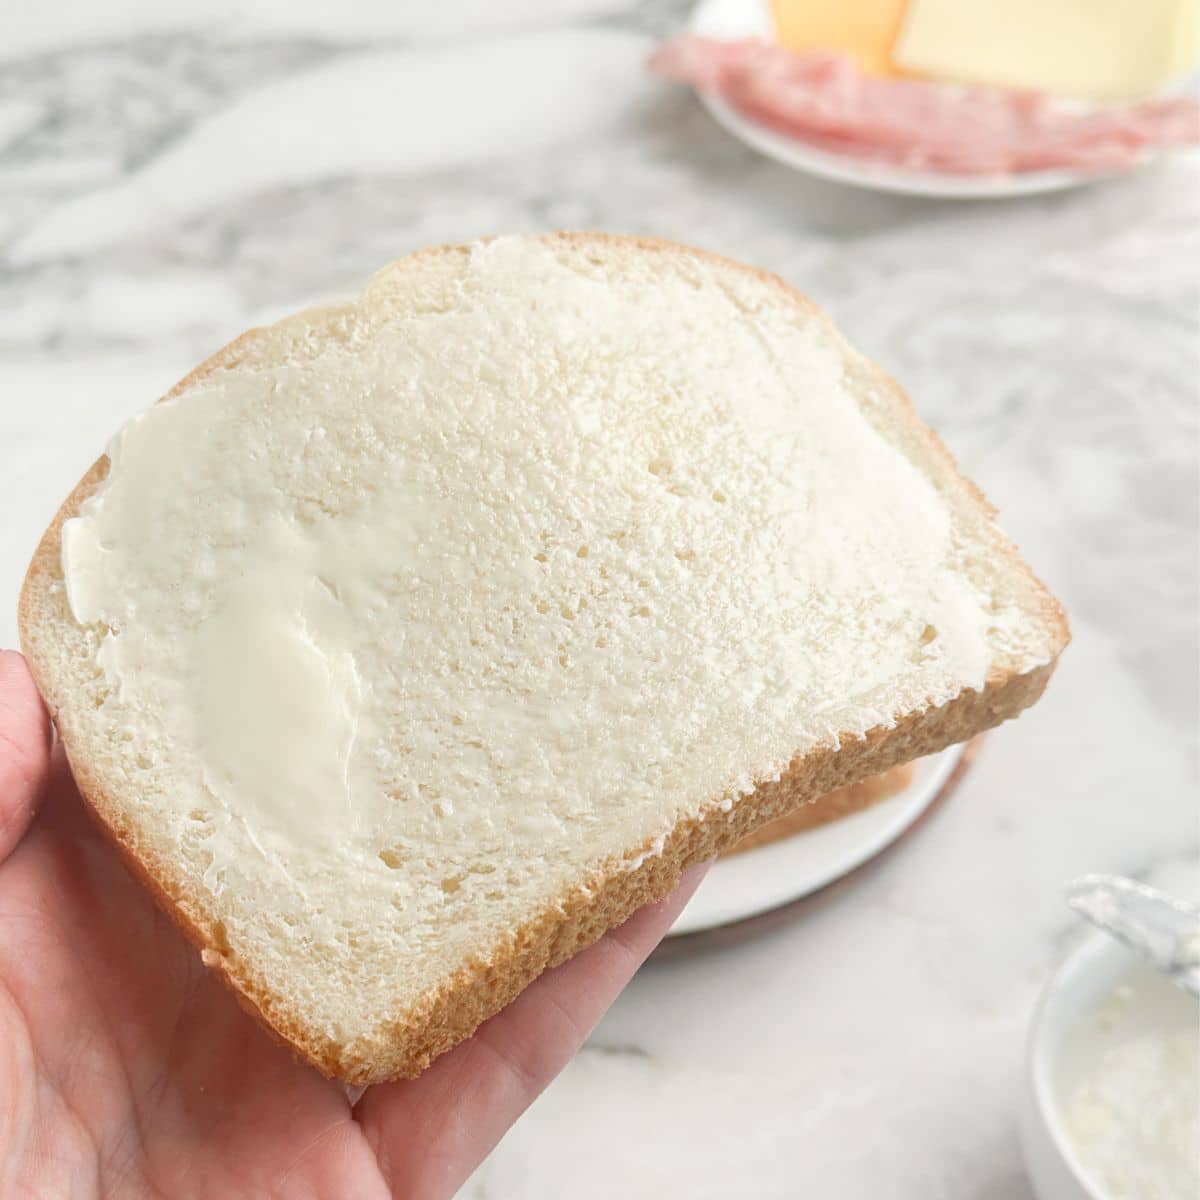 Hand holding a slice of bread with butter.